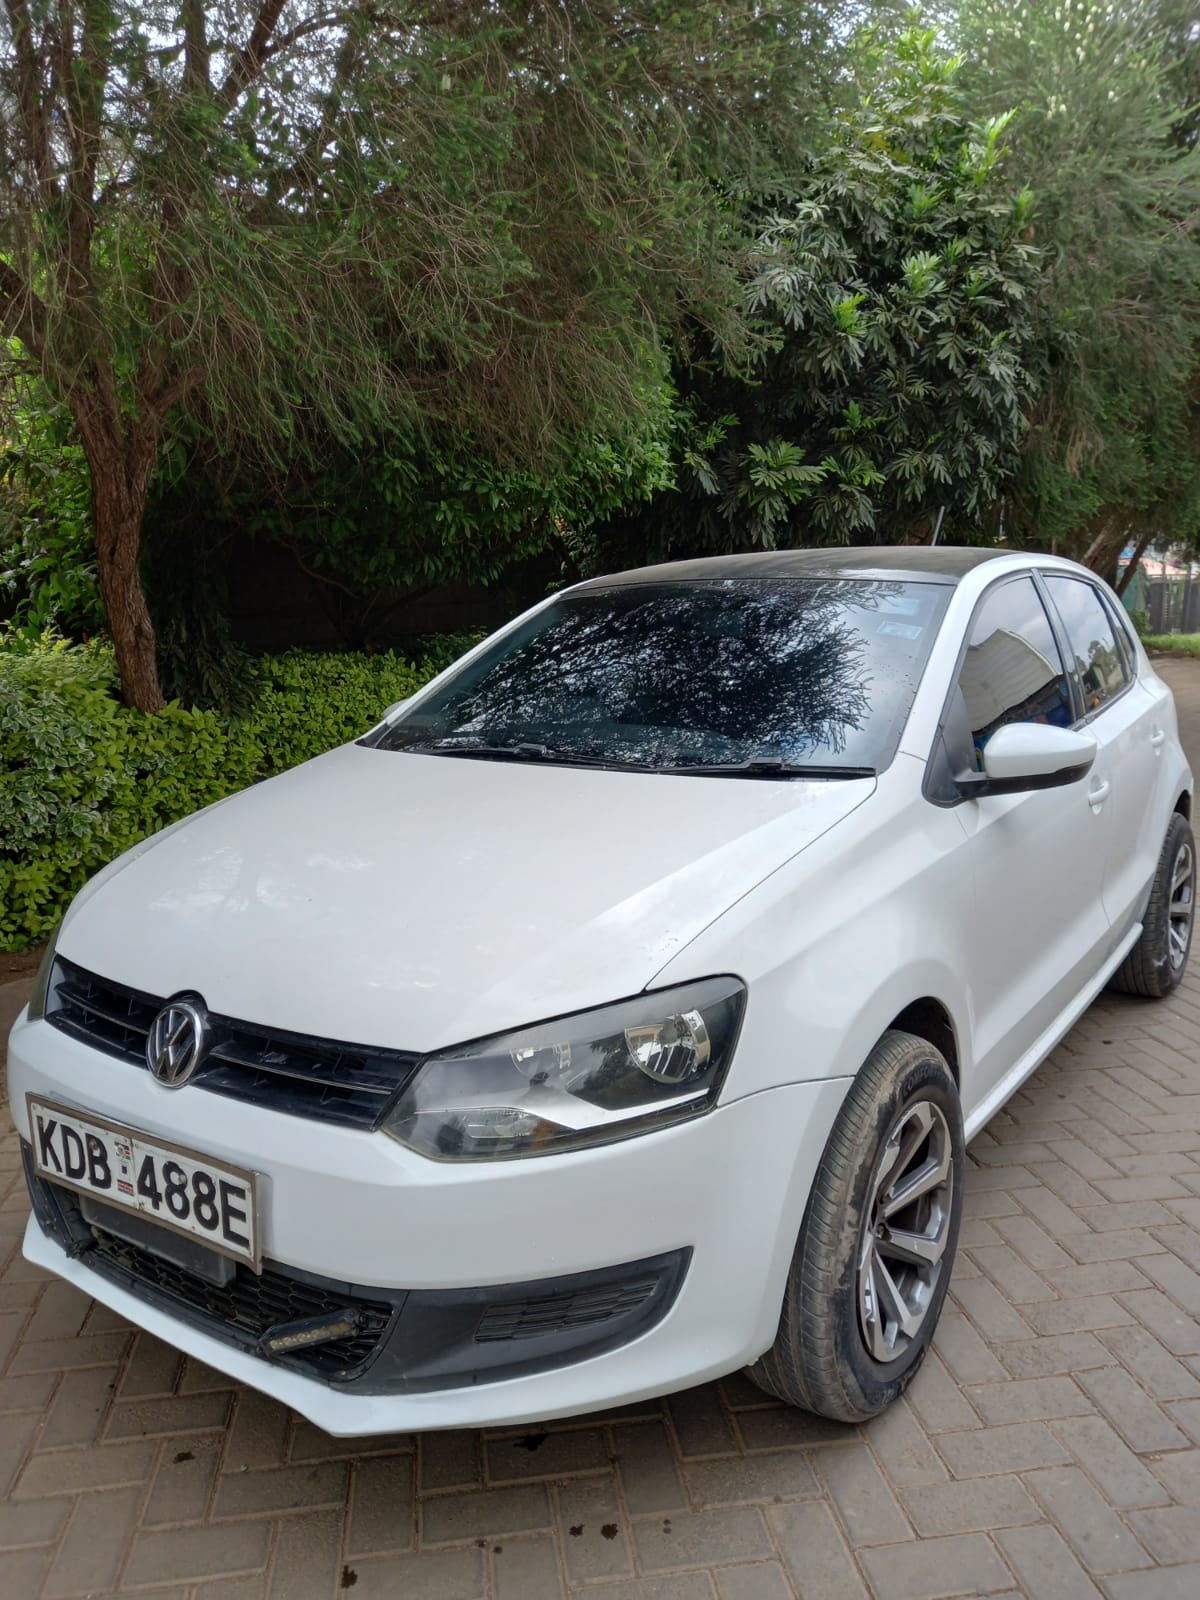 Volkswagen Polo 2013 Pay 20% deposit Exclusive Offer